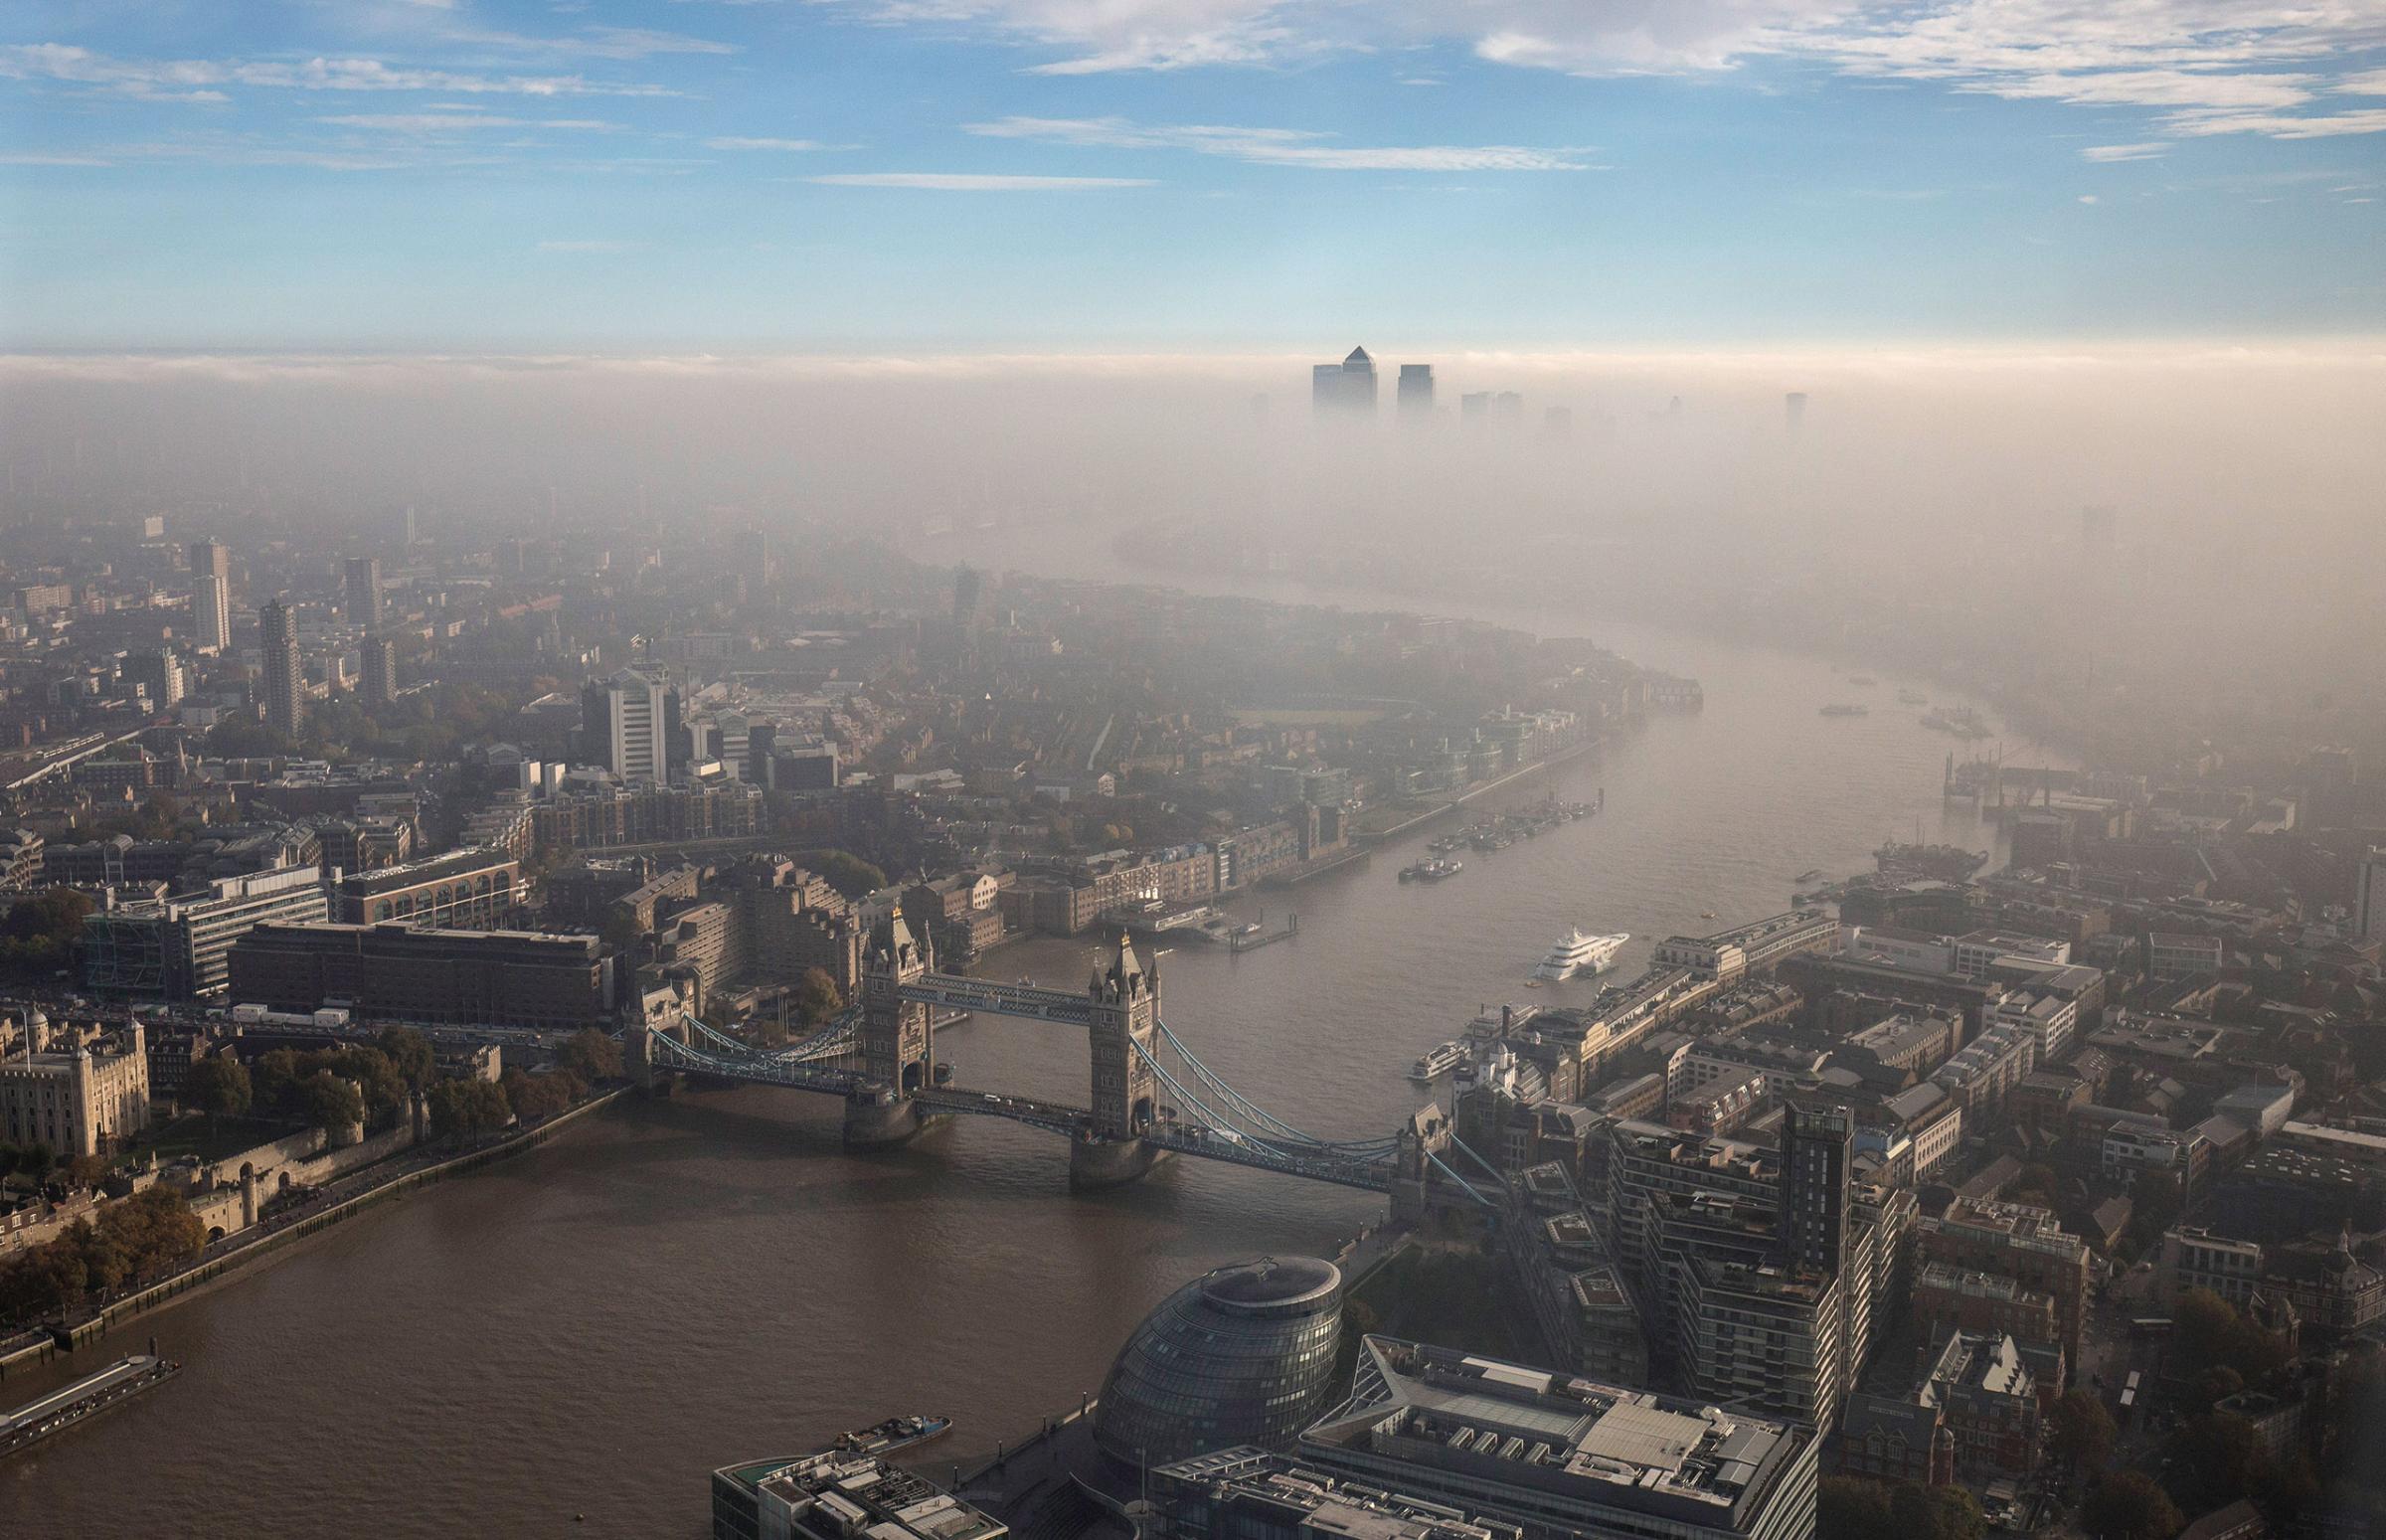 A general view of Tower Bridge and the city through the fog, seen from The View From The Shard in London, on Oct. 31, 2016.